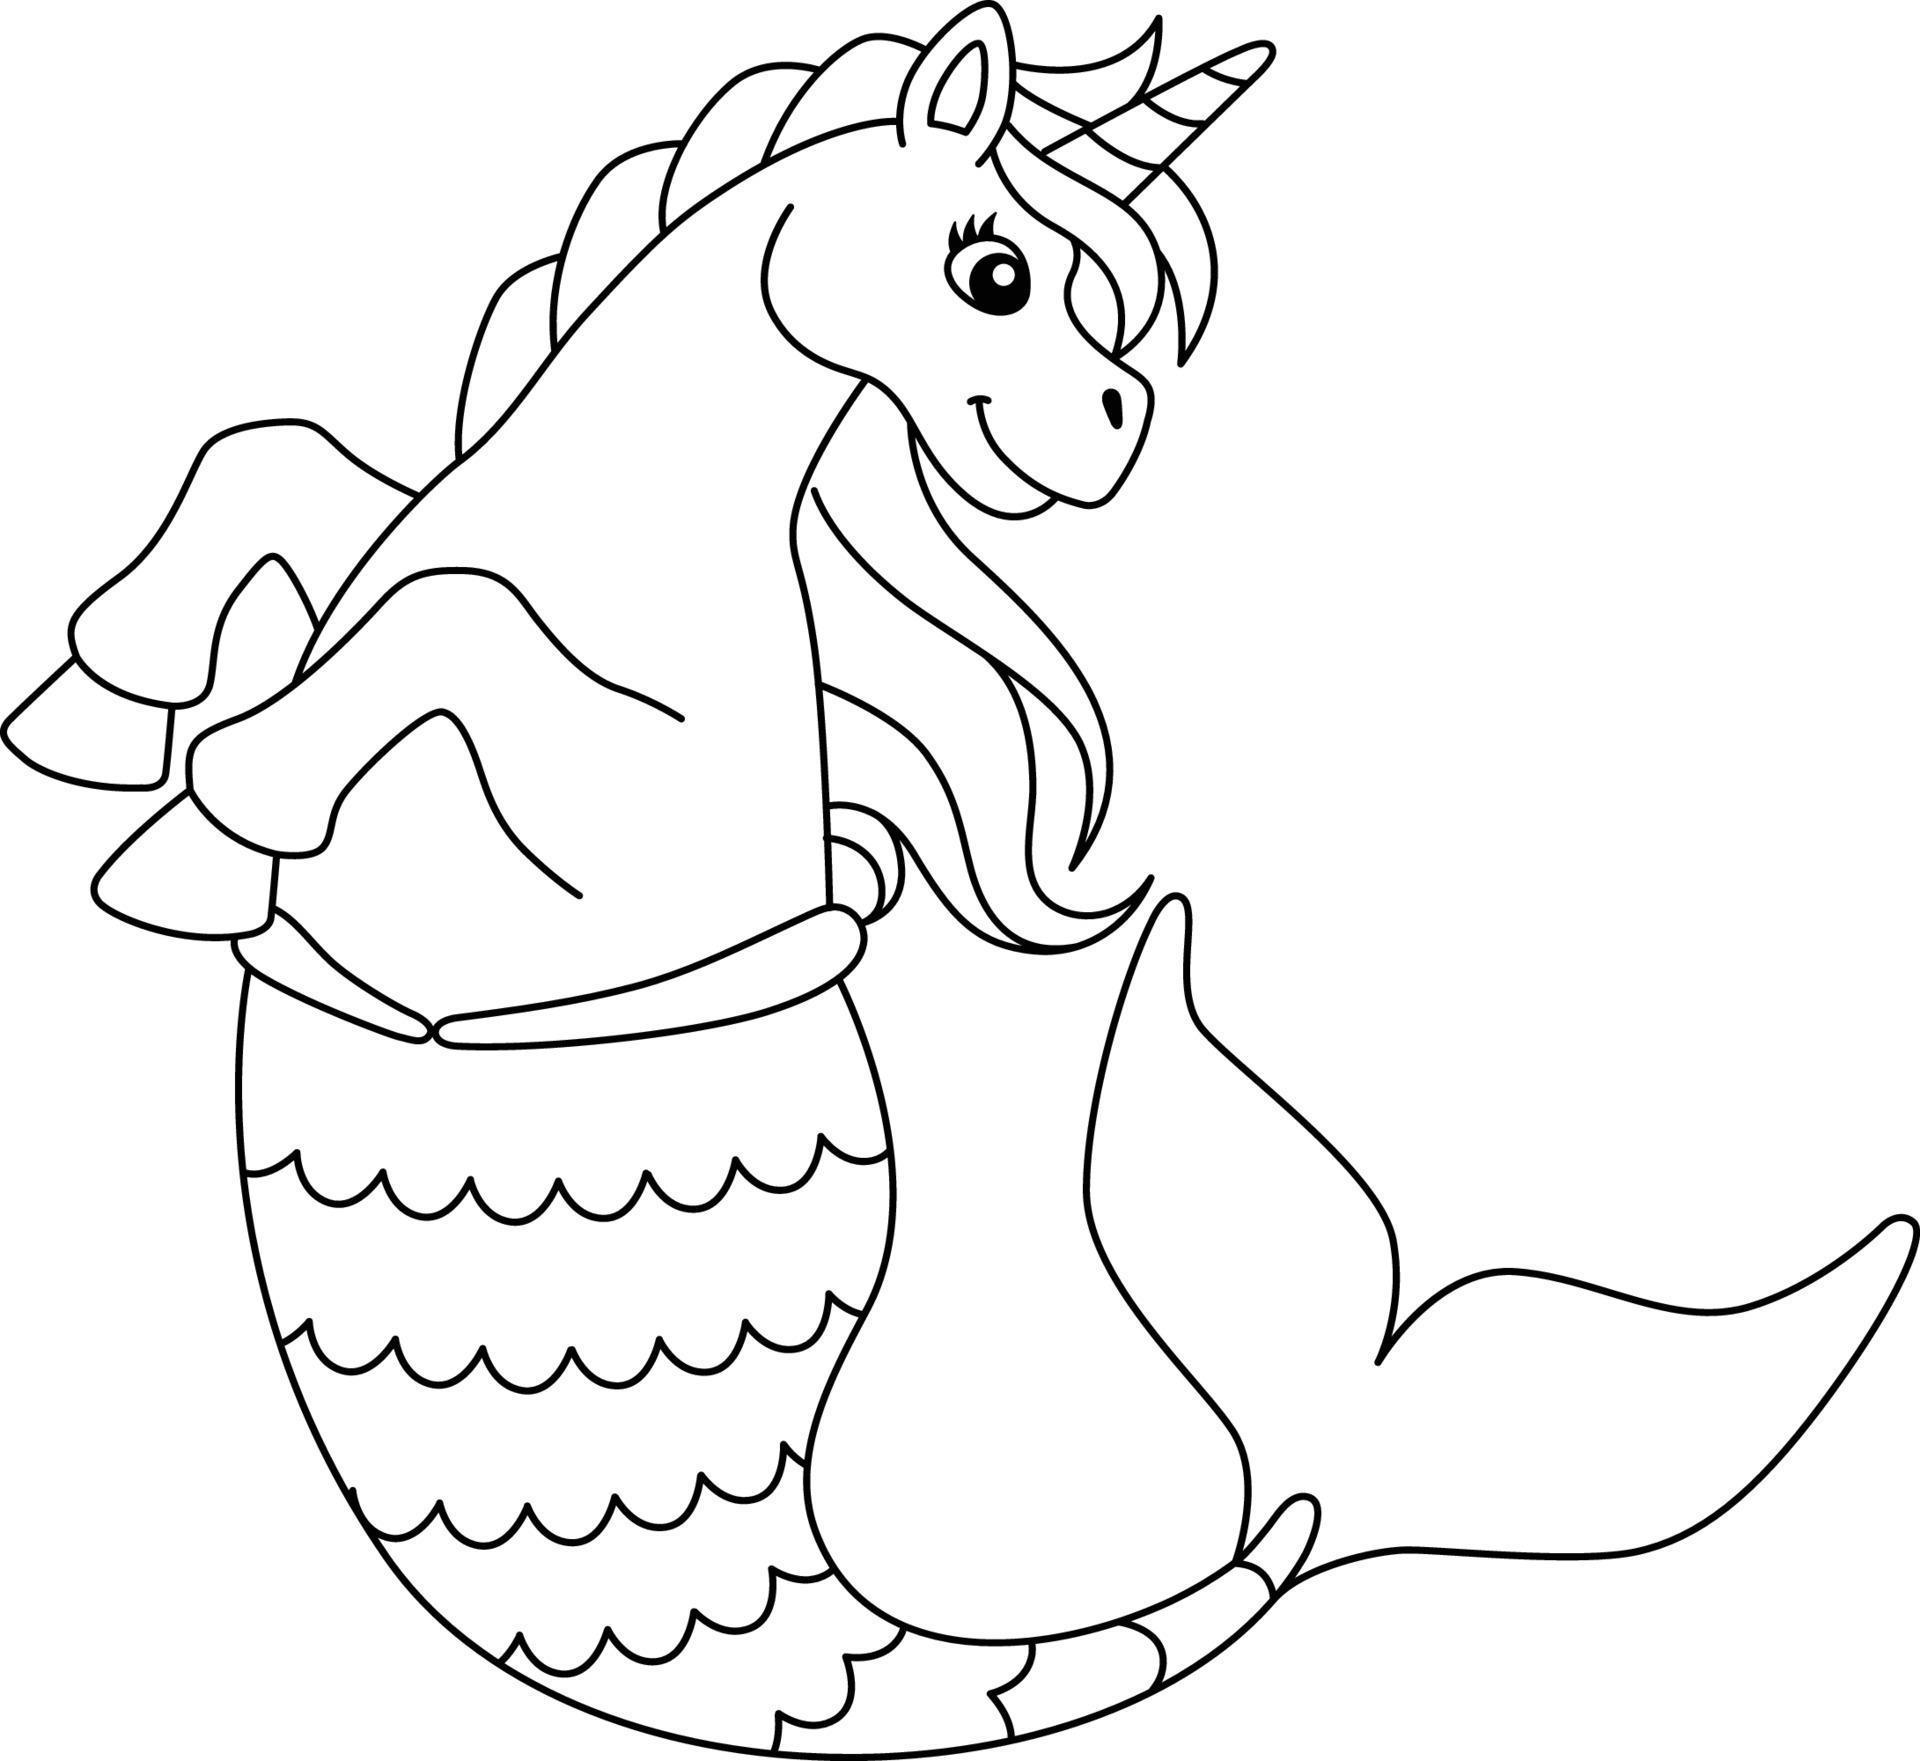 Unicorn Mermaid Coloring Page Isolated for Kids 6458242 Vector Art at